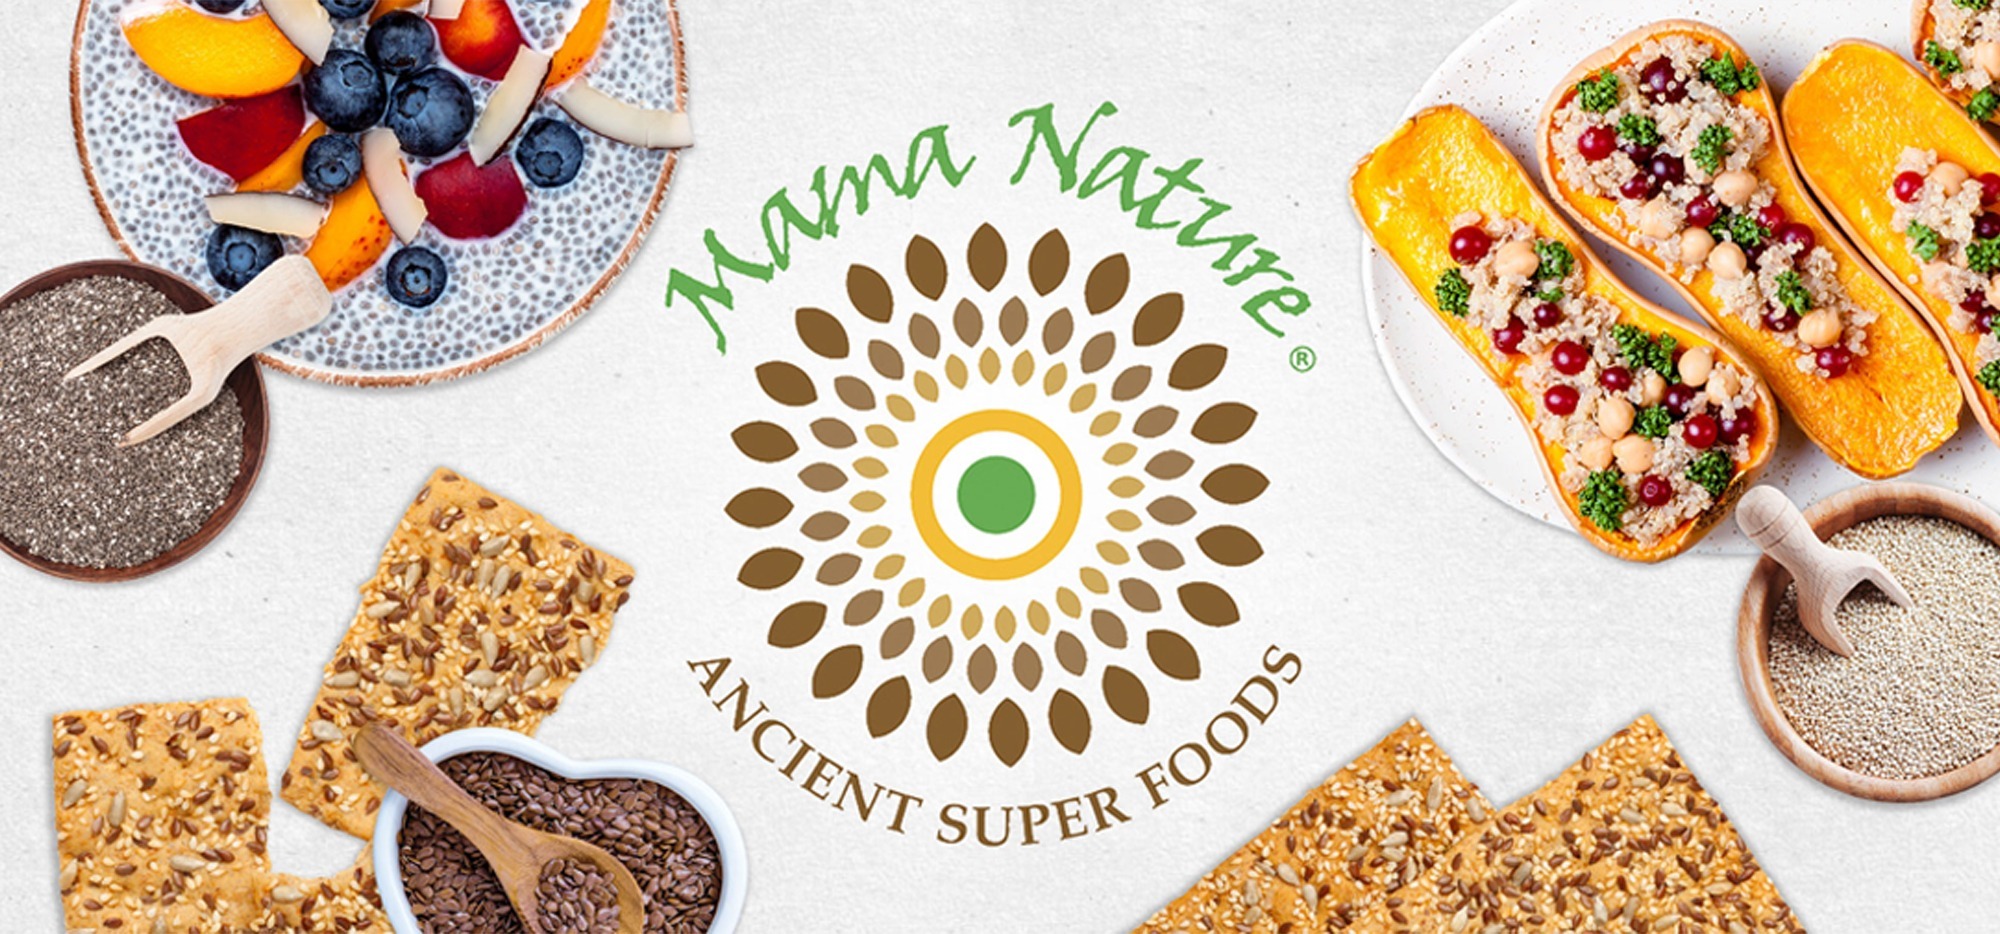 Mama Nature Ancient Super Foods Brand Inspiration by Octane Advertising Design